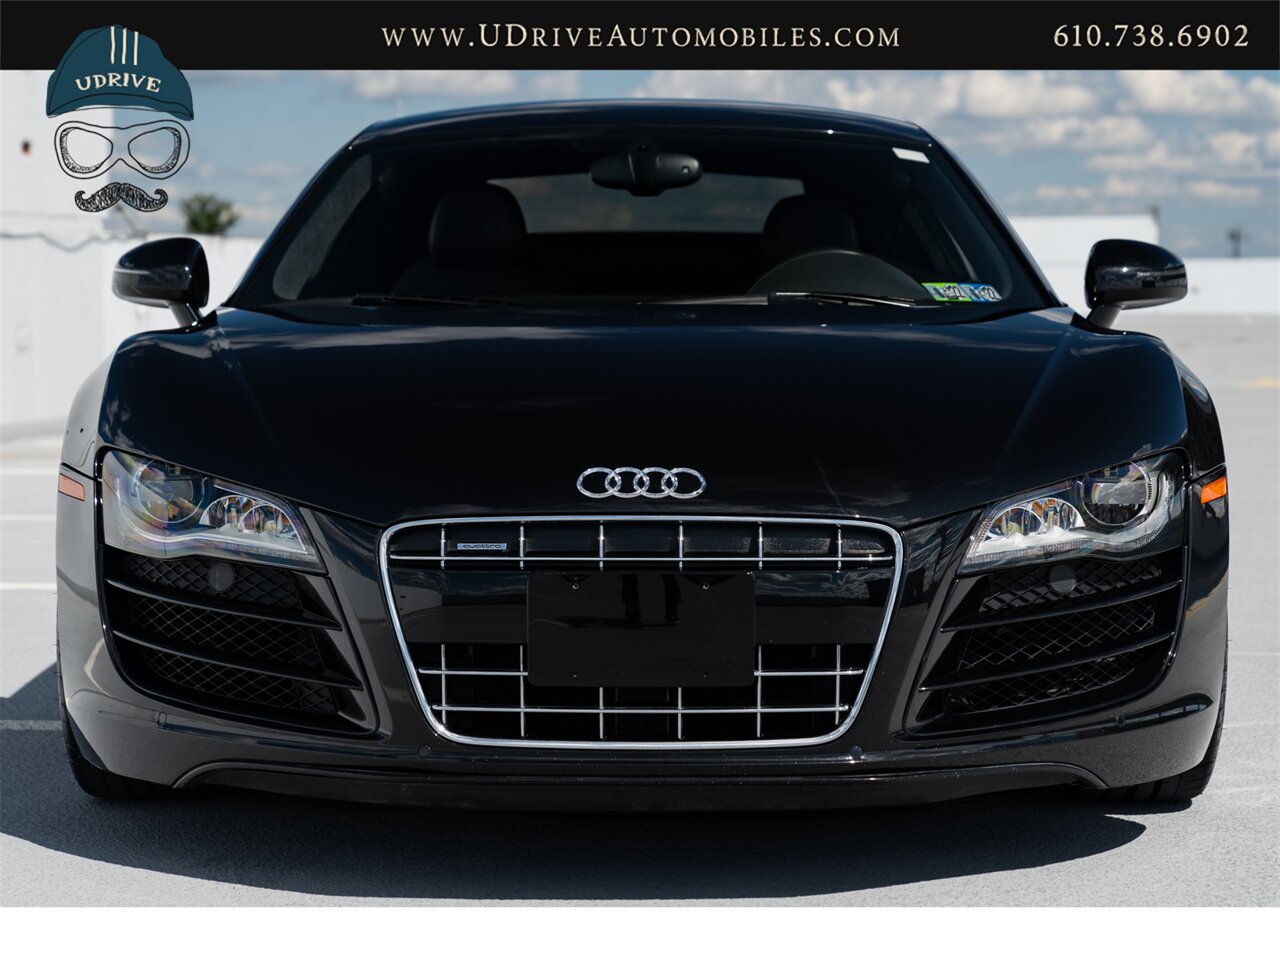 2011 Audi R8 5.2 Quattro  V10 6 Speed Manual - Photo 13 - West Chester, PA 19382